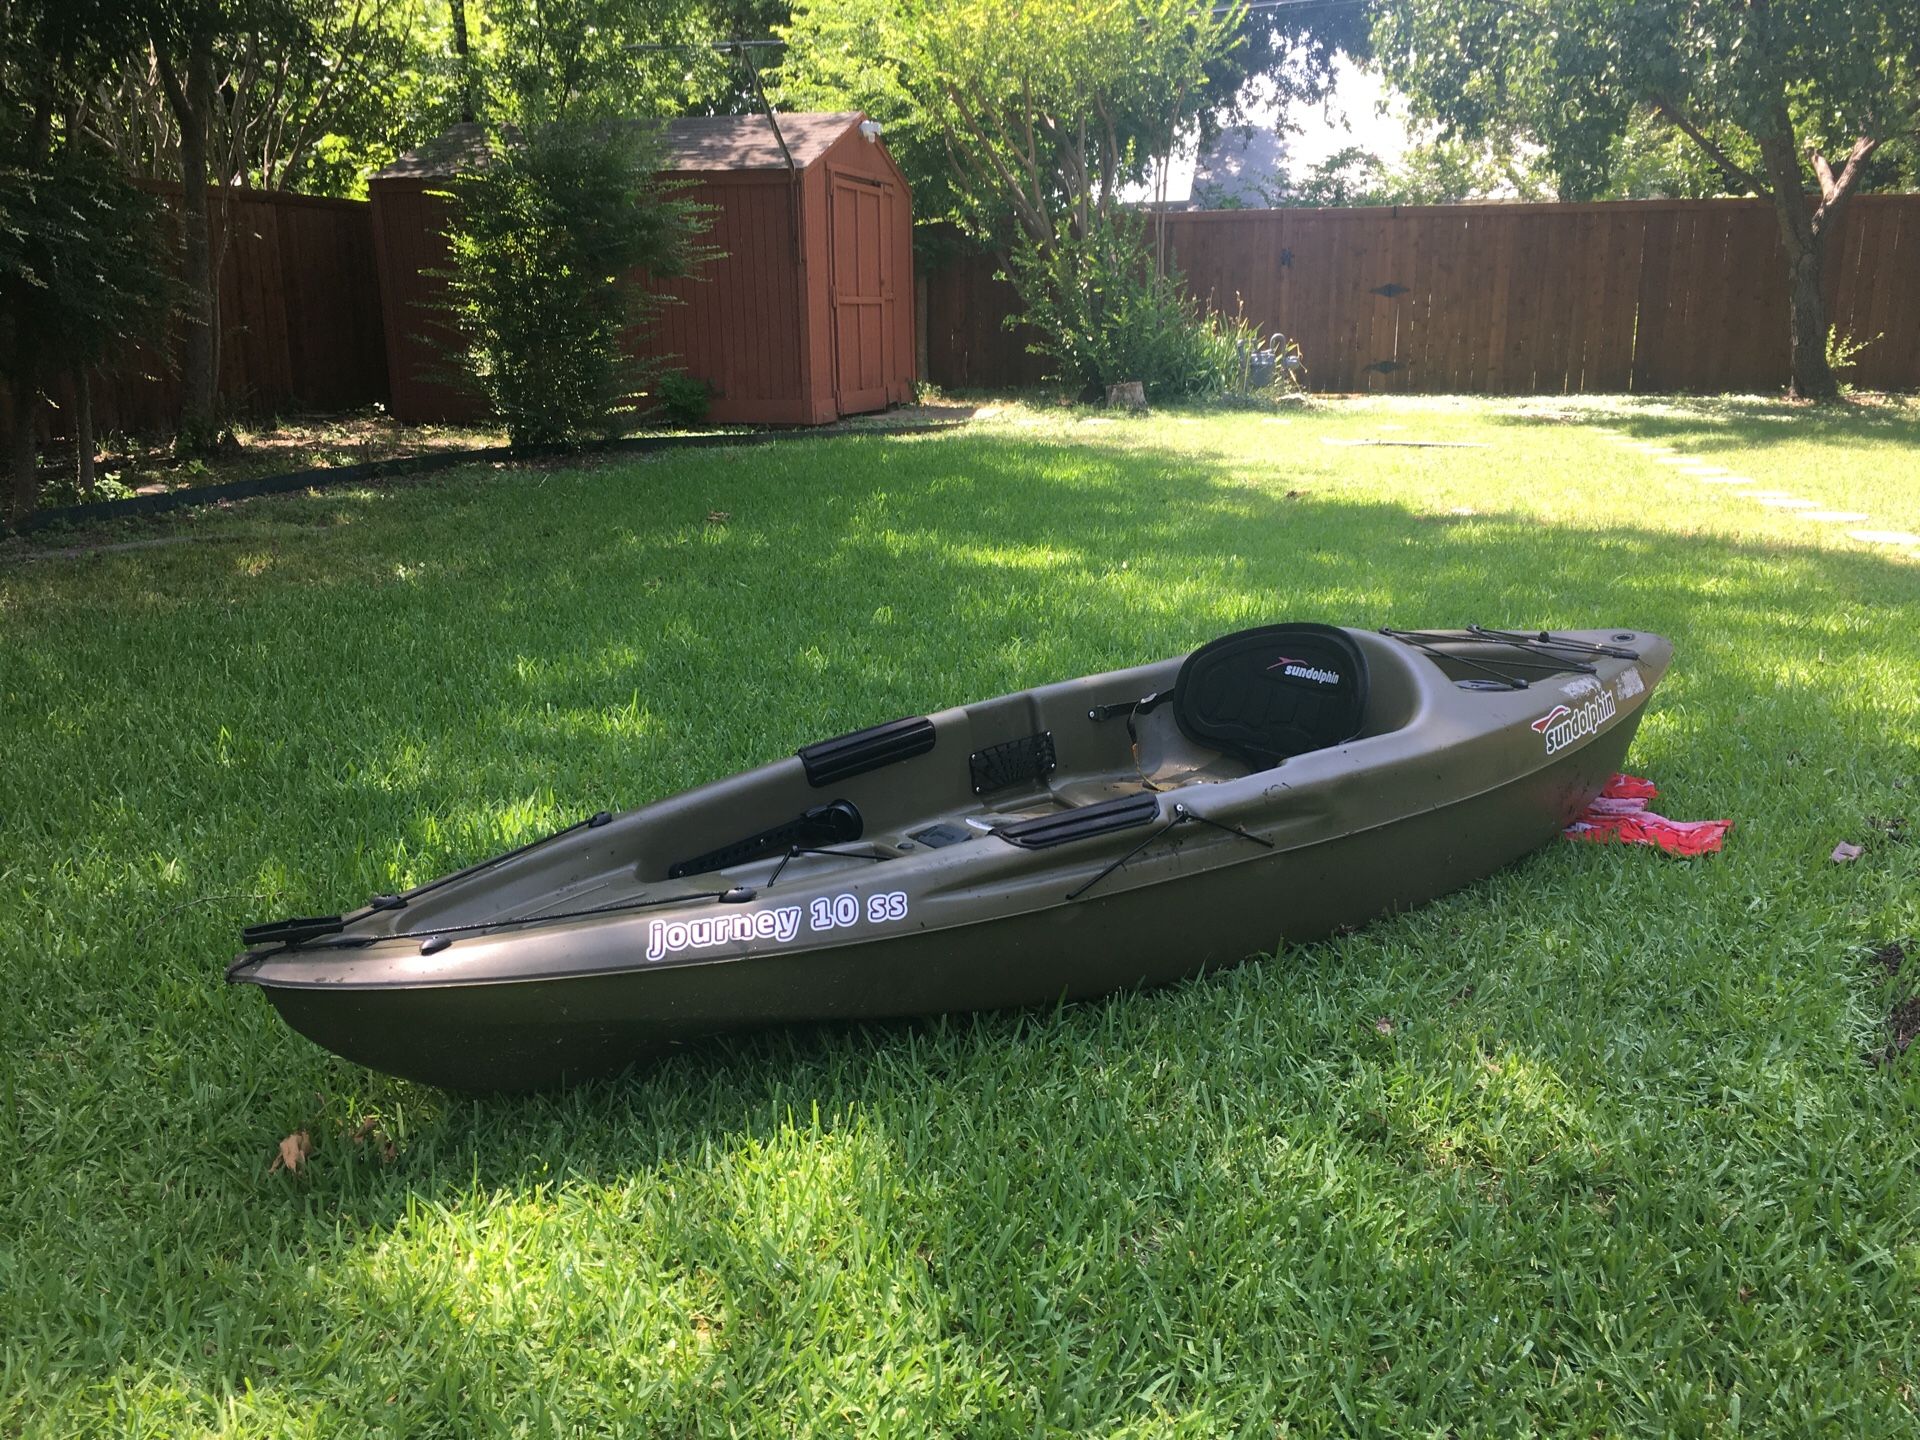 Kayak for sale! Used once